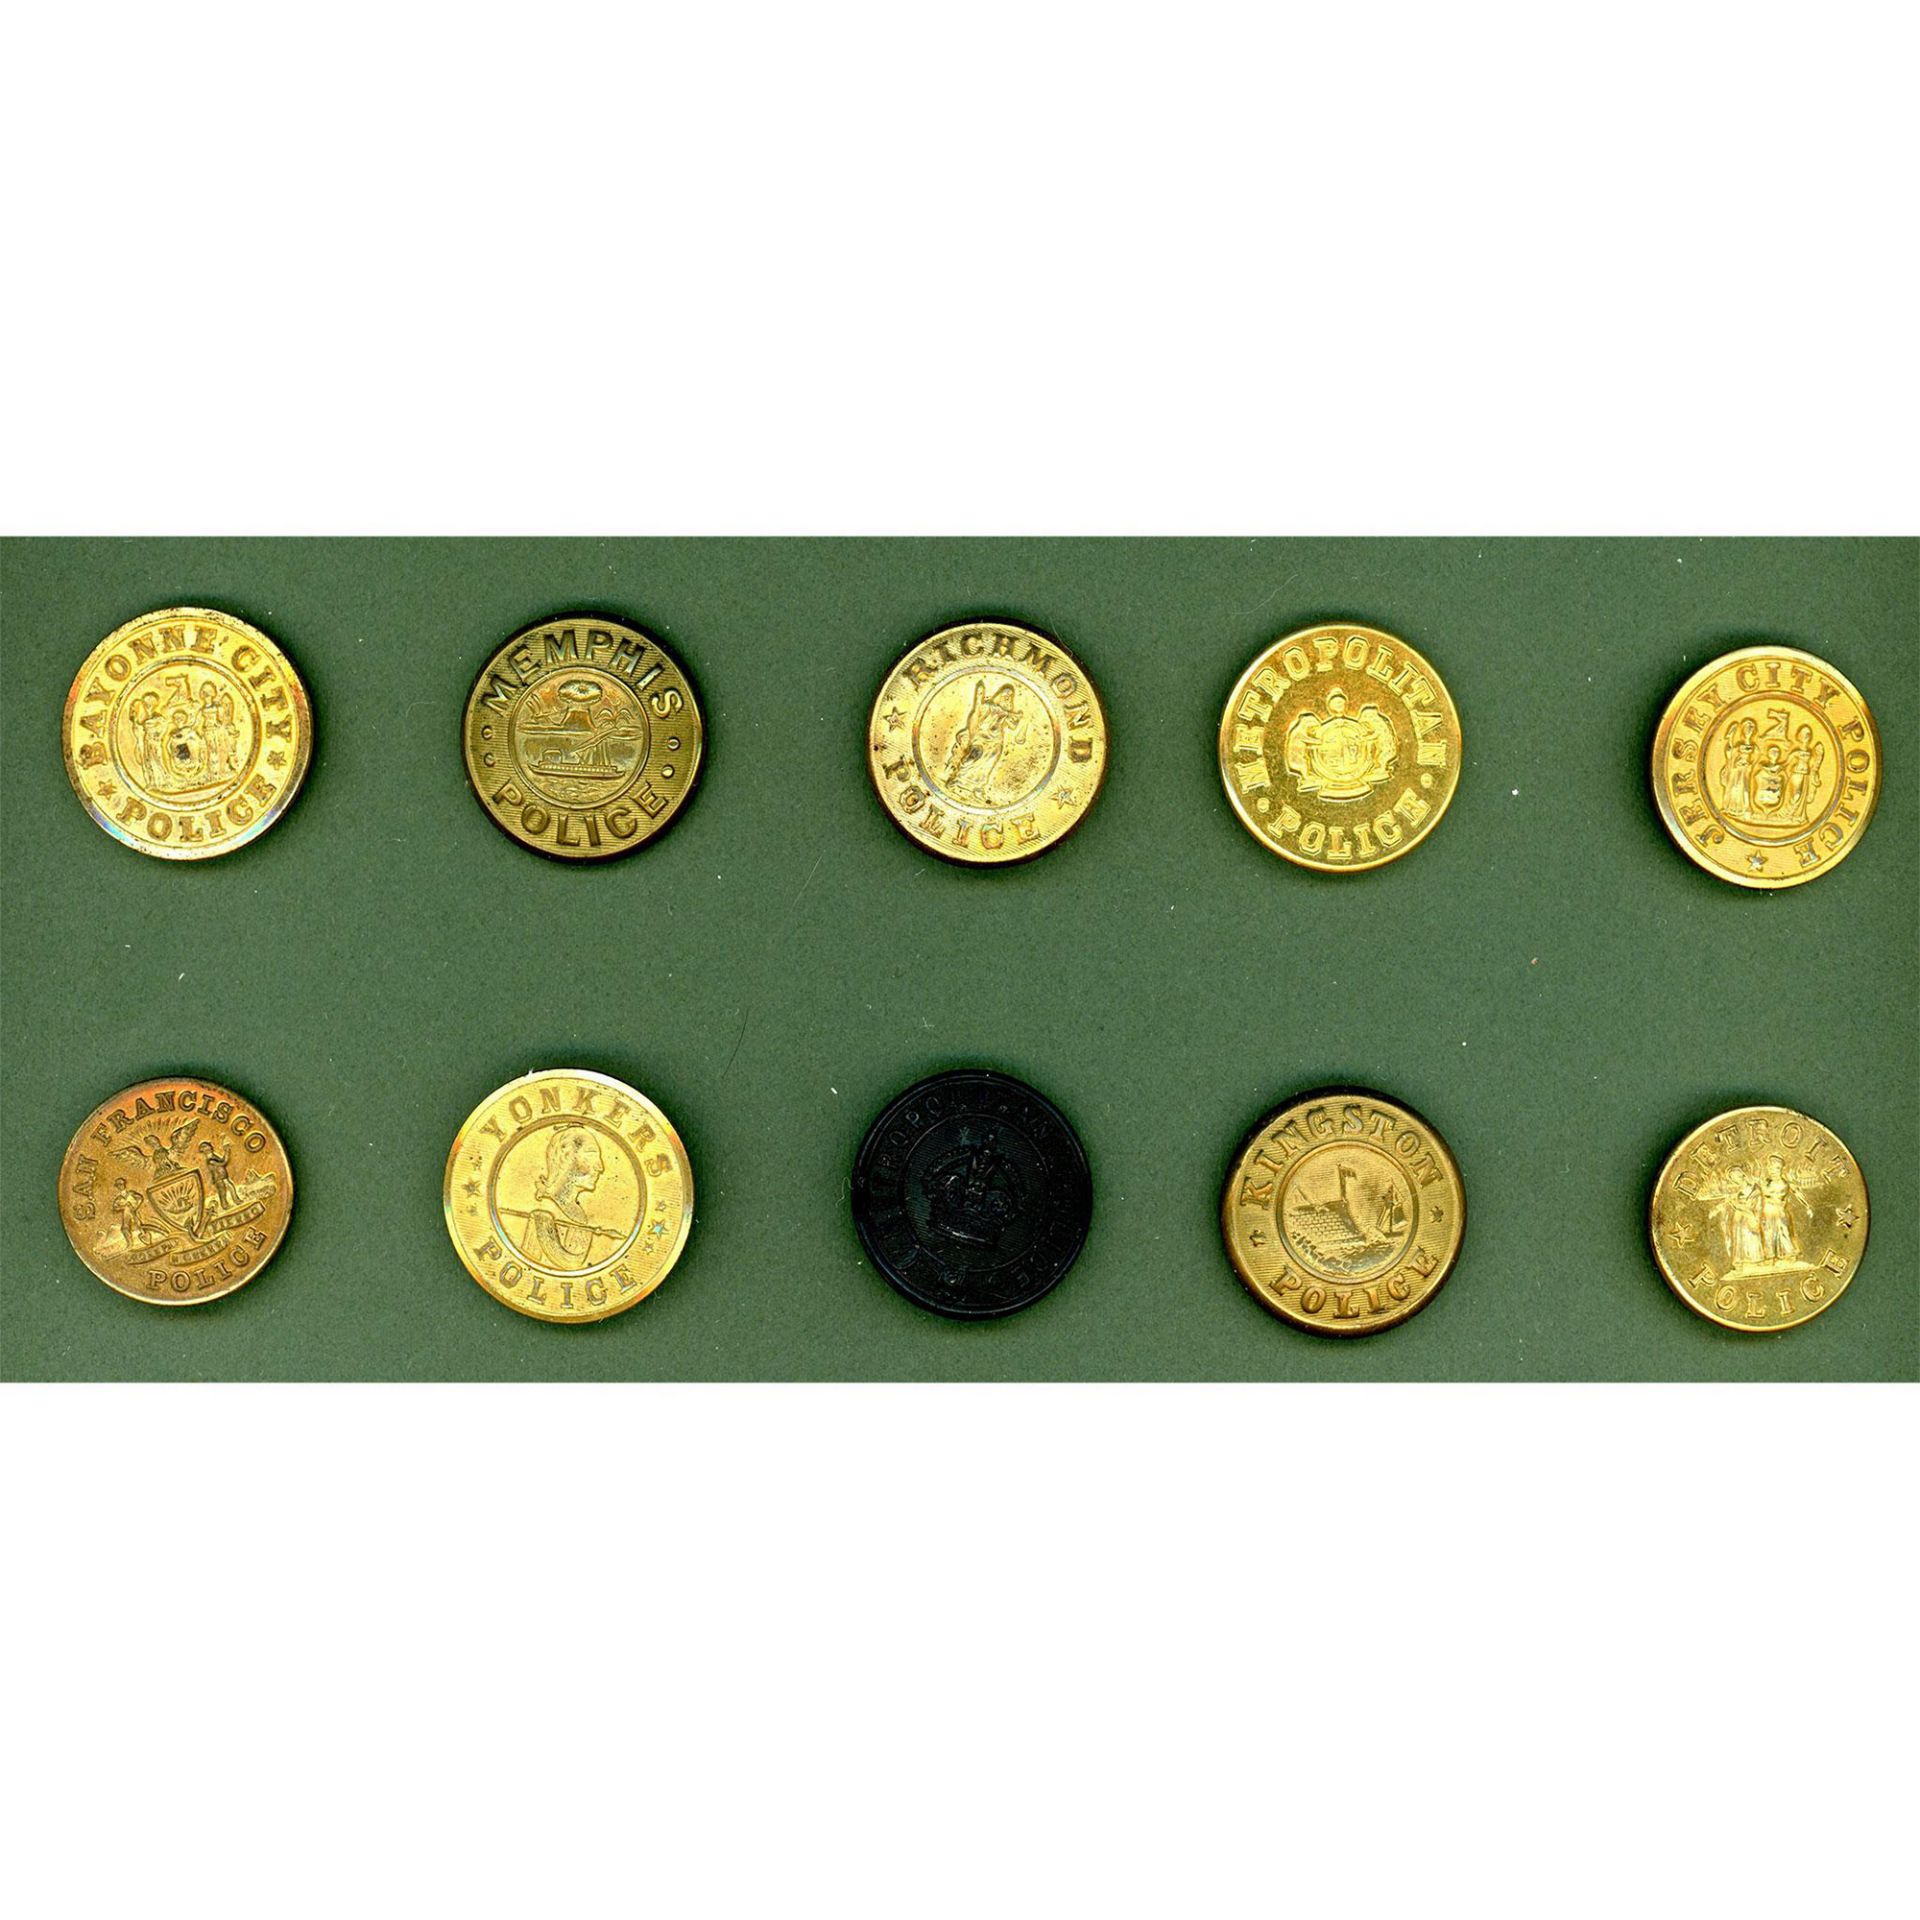 A card of division one uniform buttons - Image 4 of 4